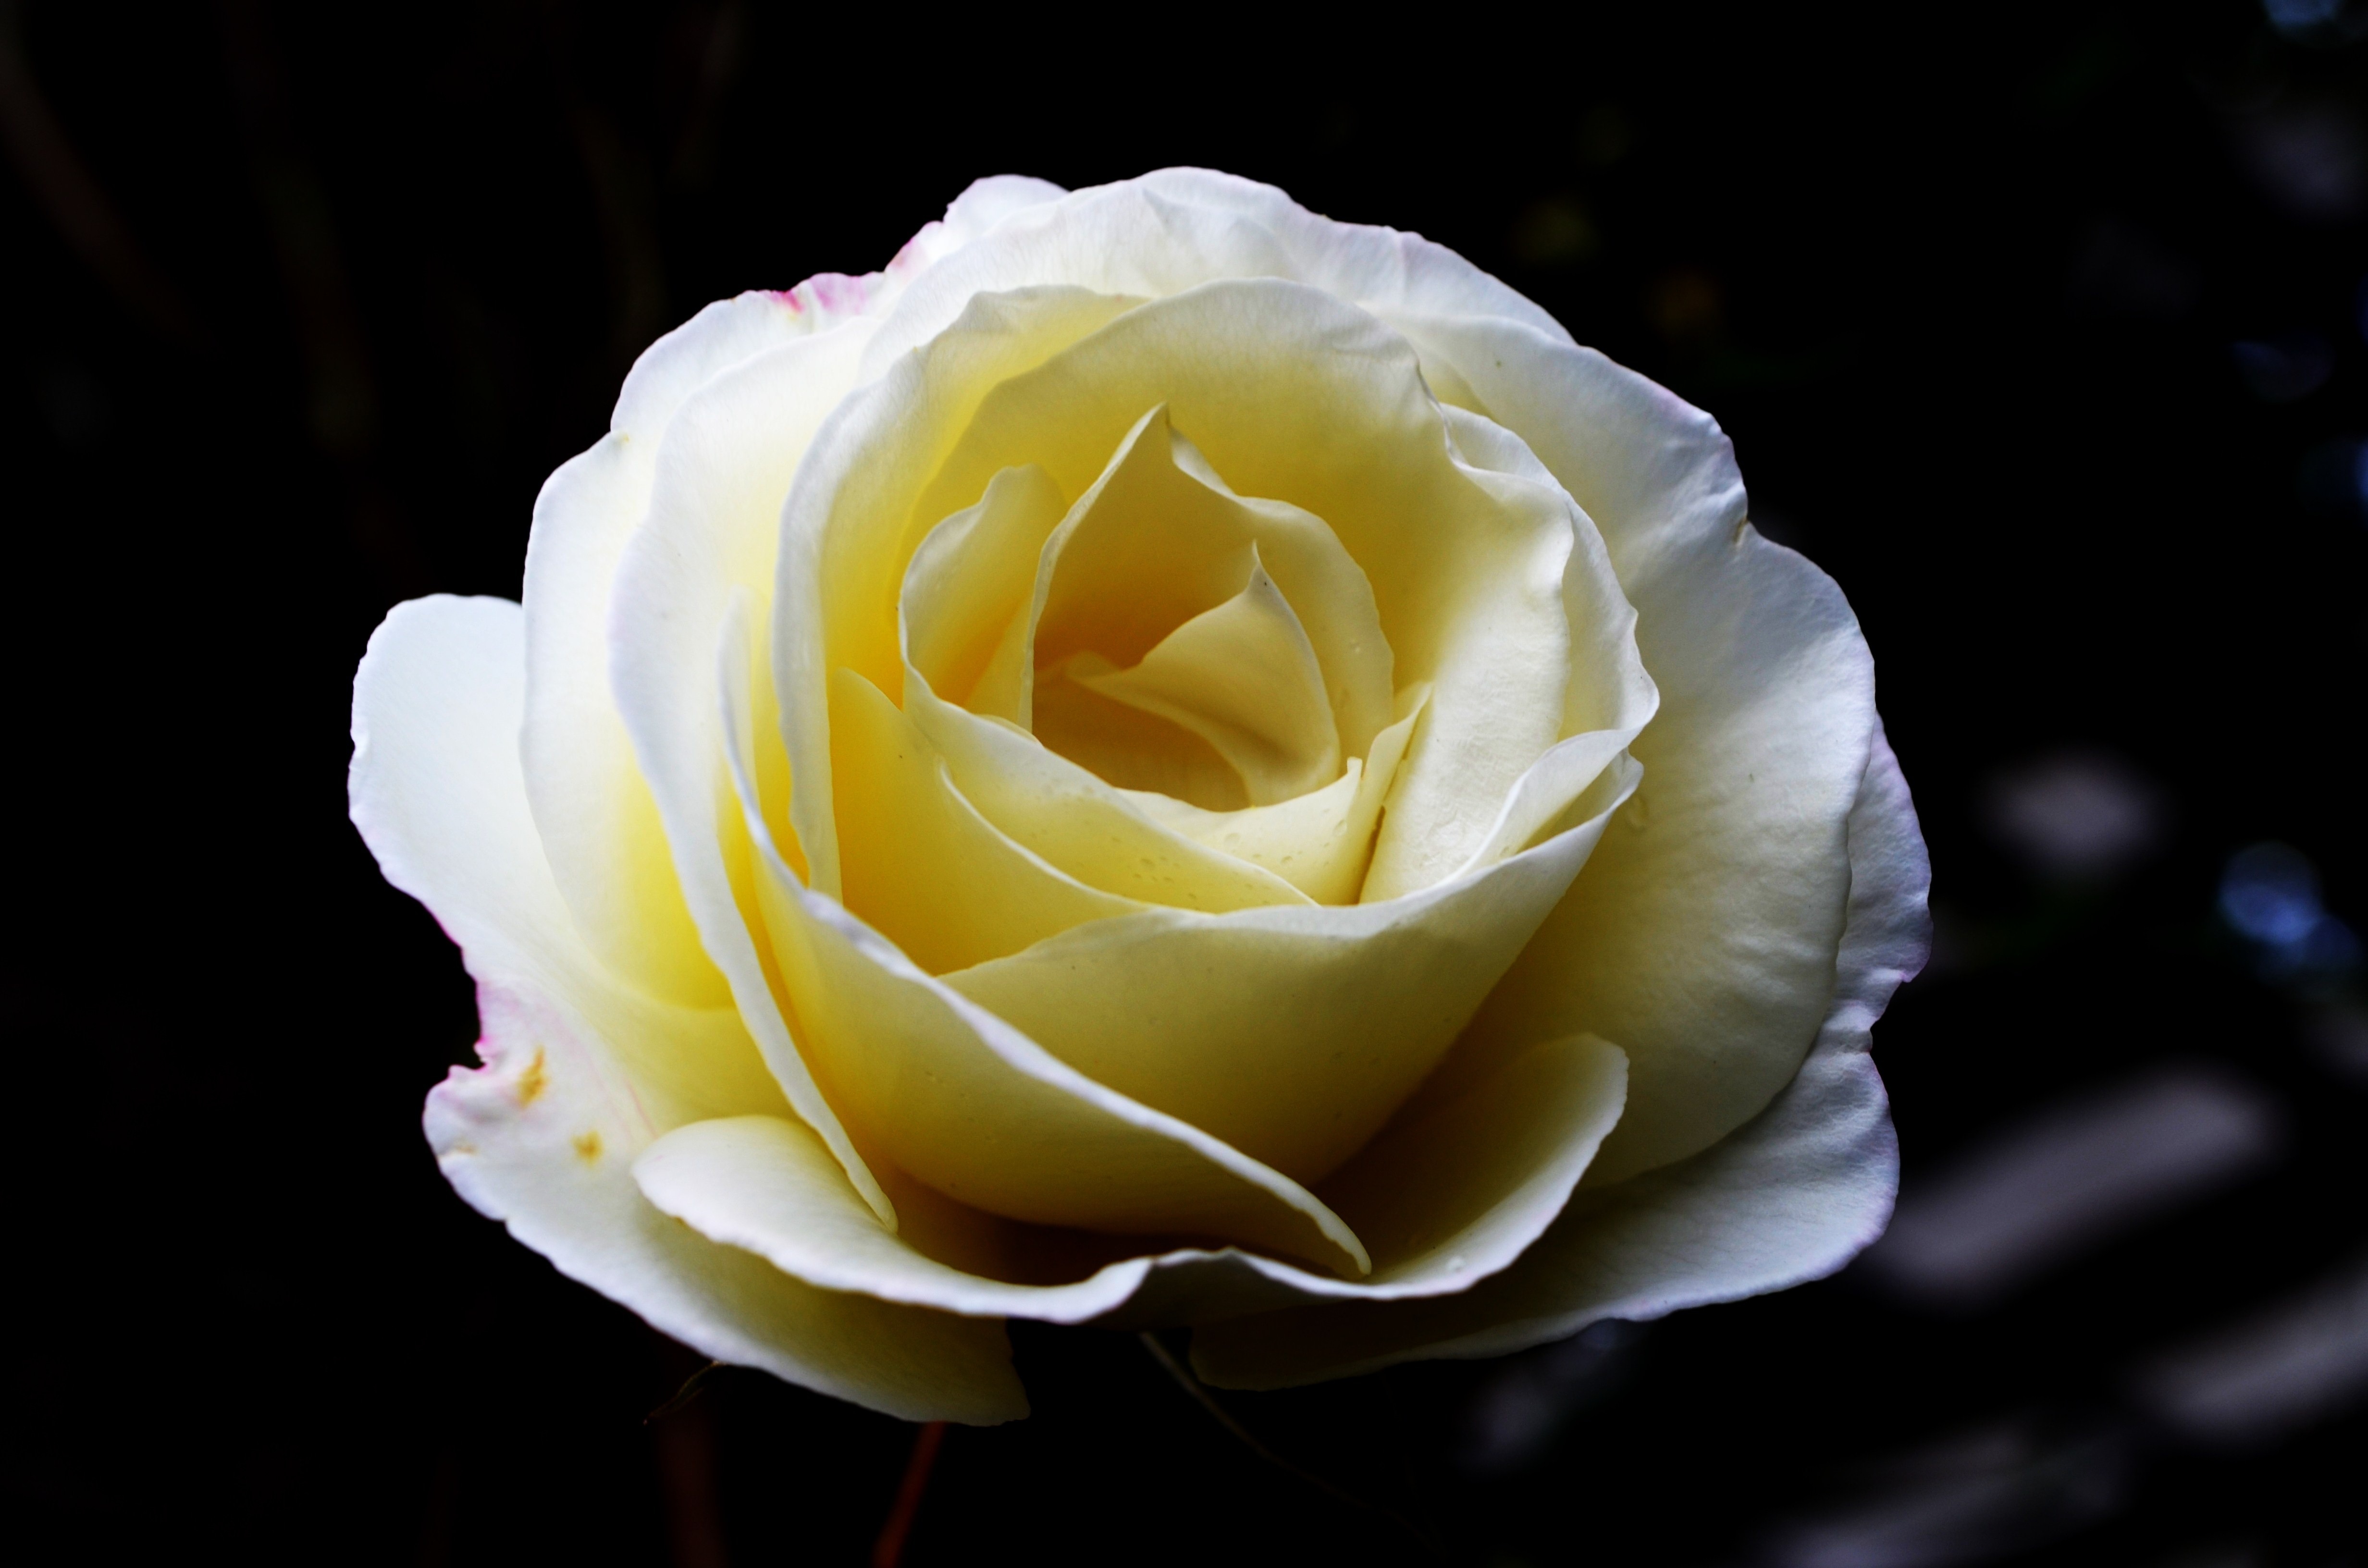 white and yellow rose